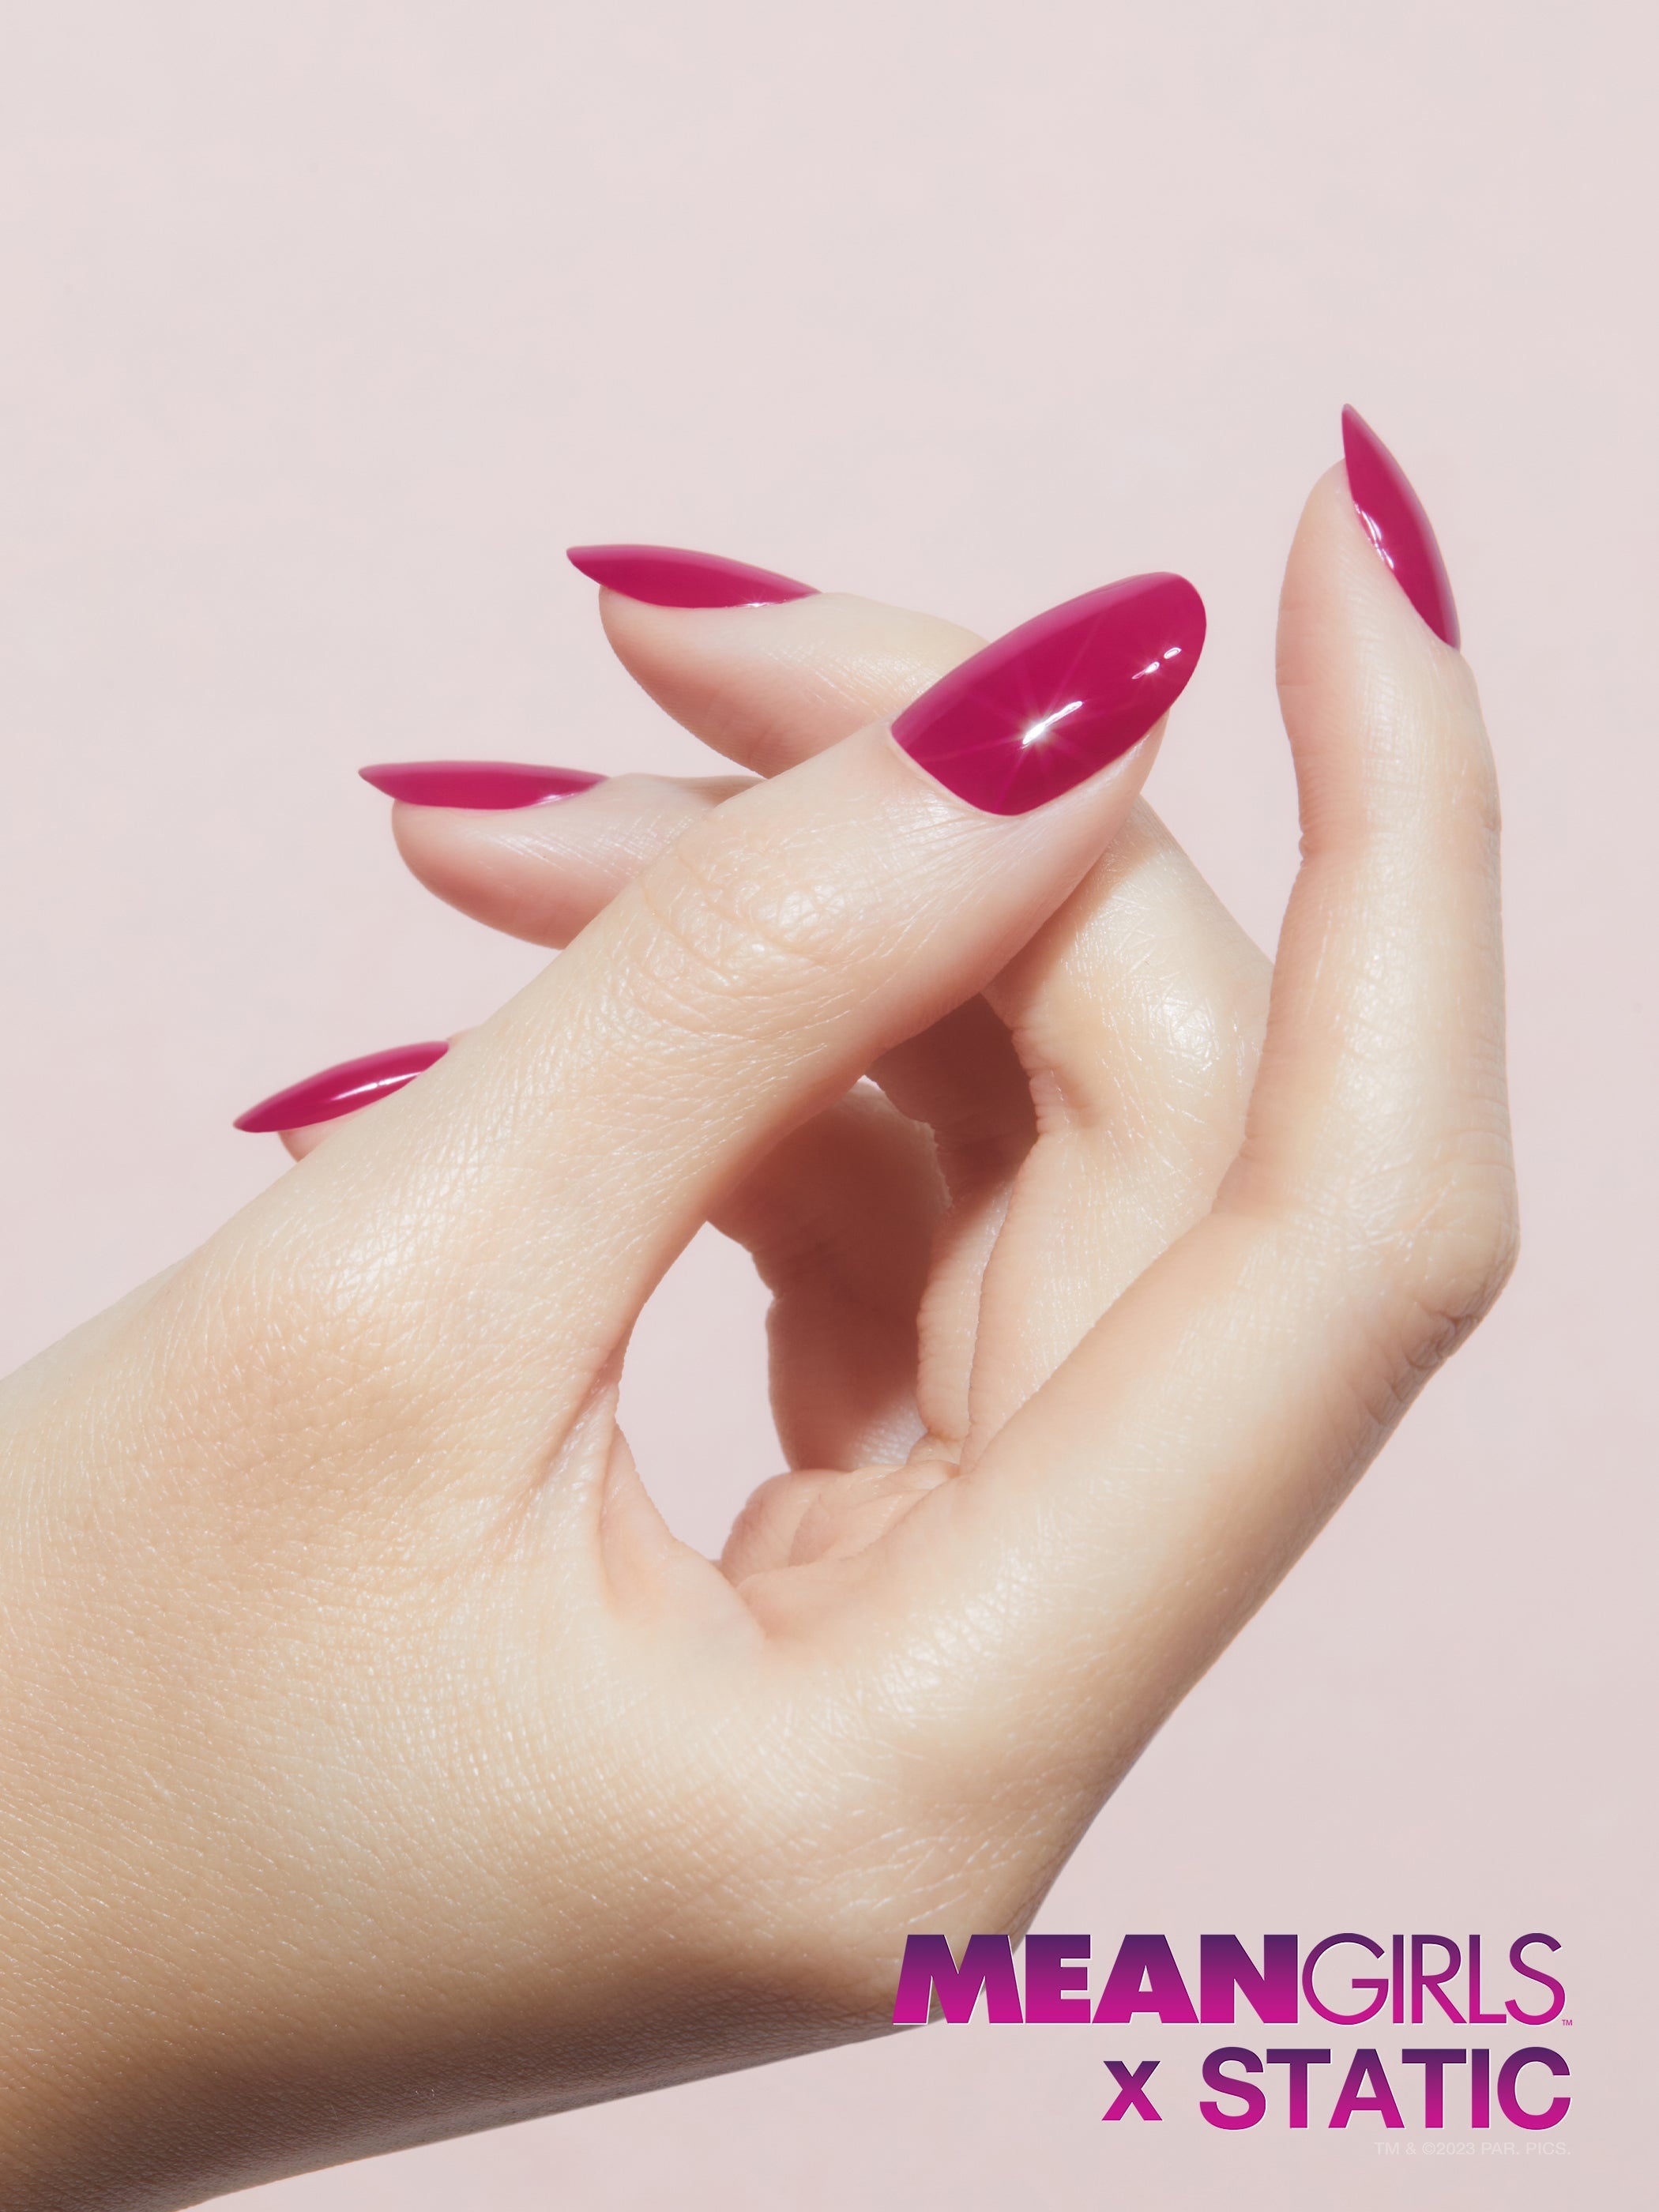 Multi Award-Winning Reusable Pop-On Manicures® in Delicate Pink Short Almond